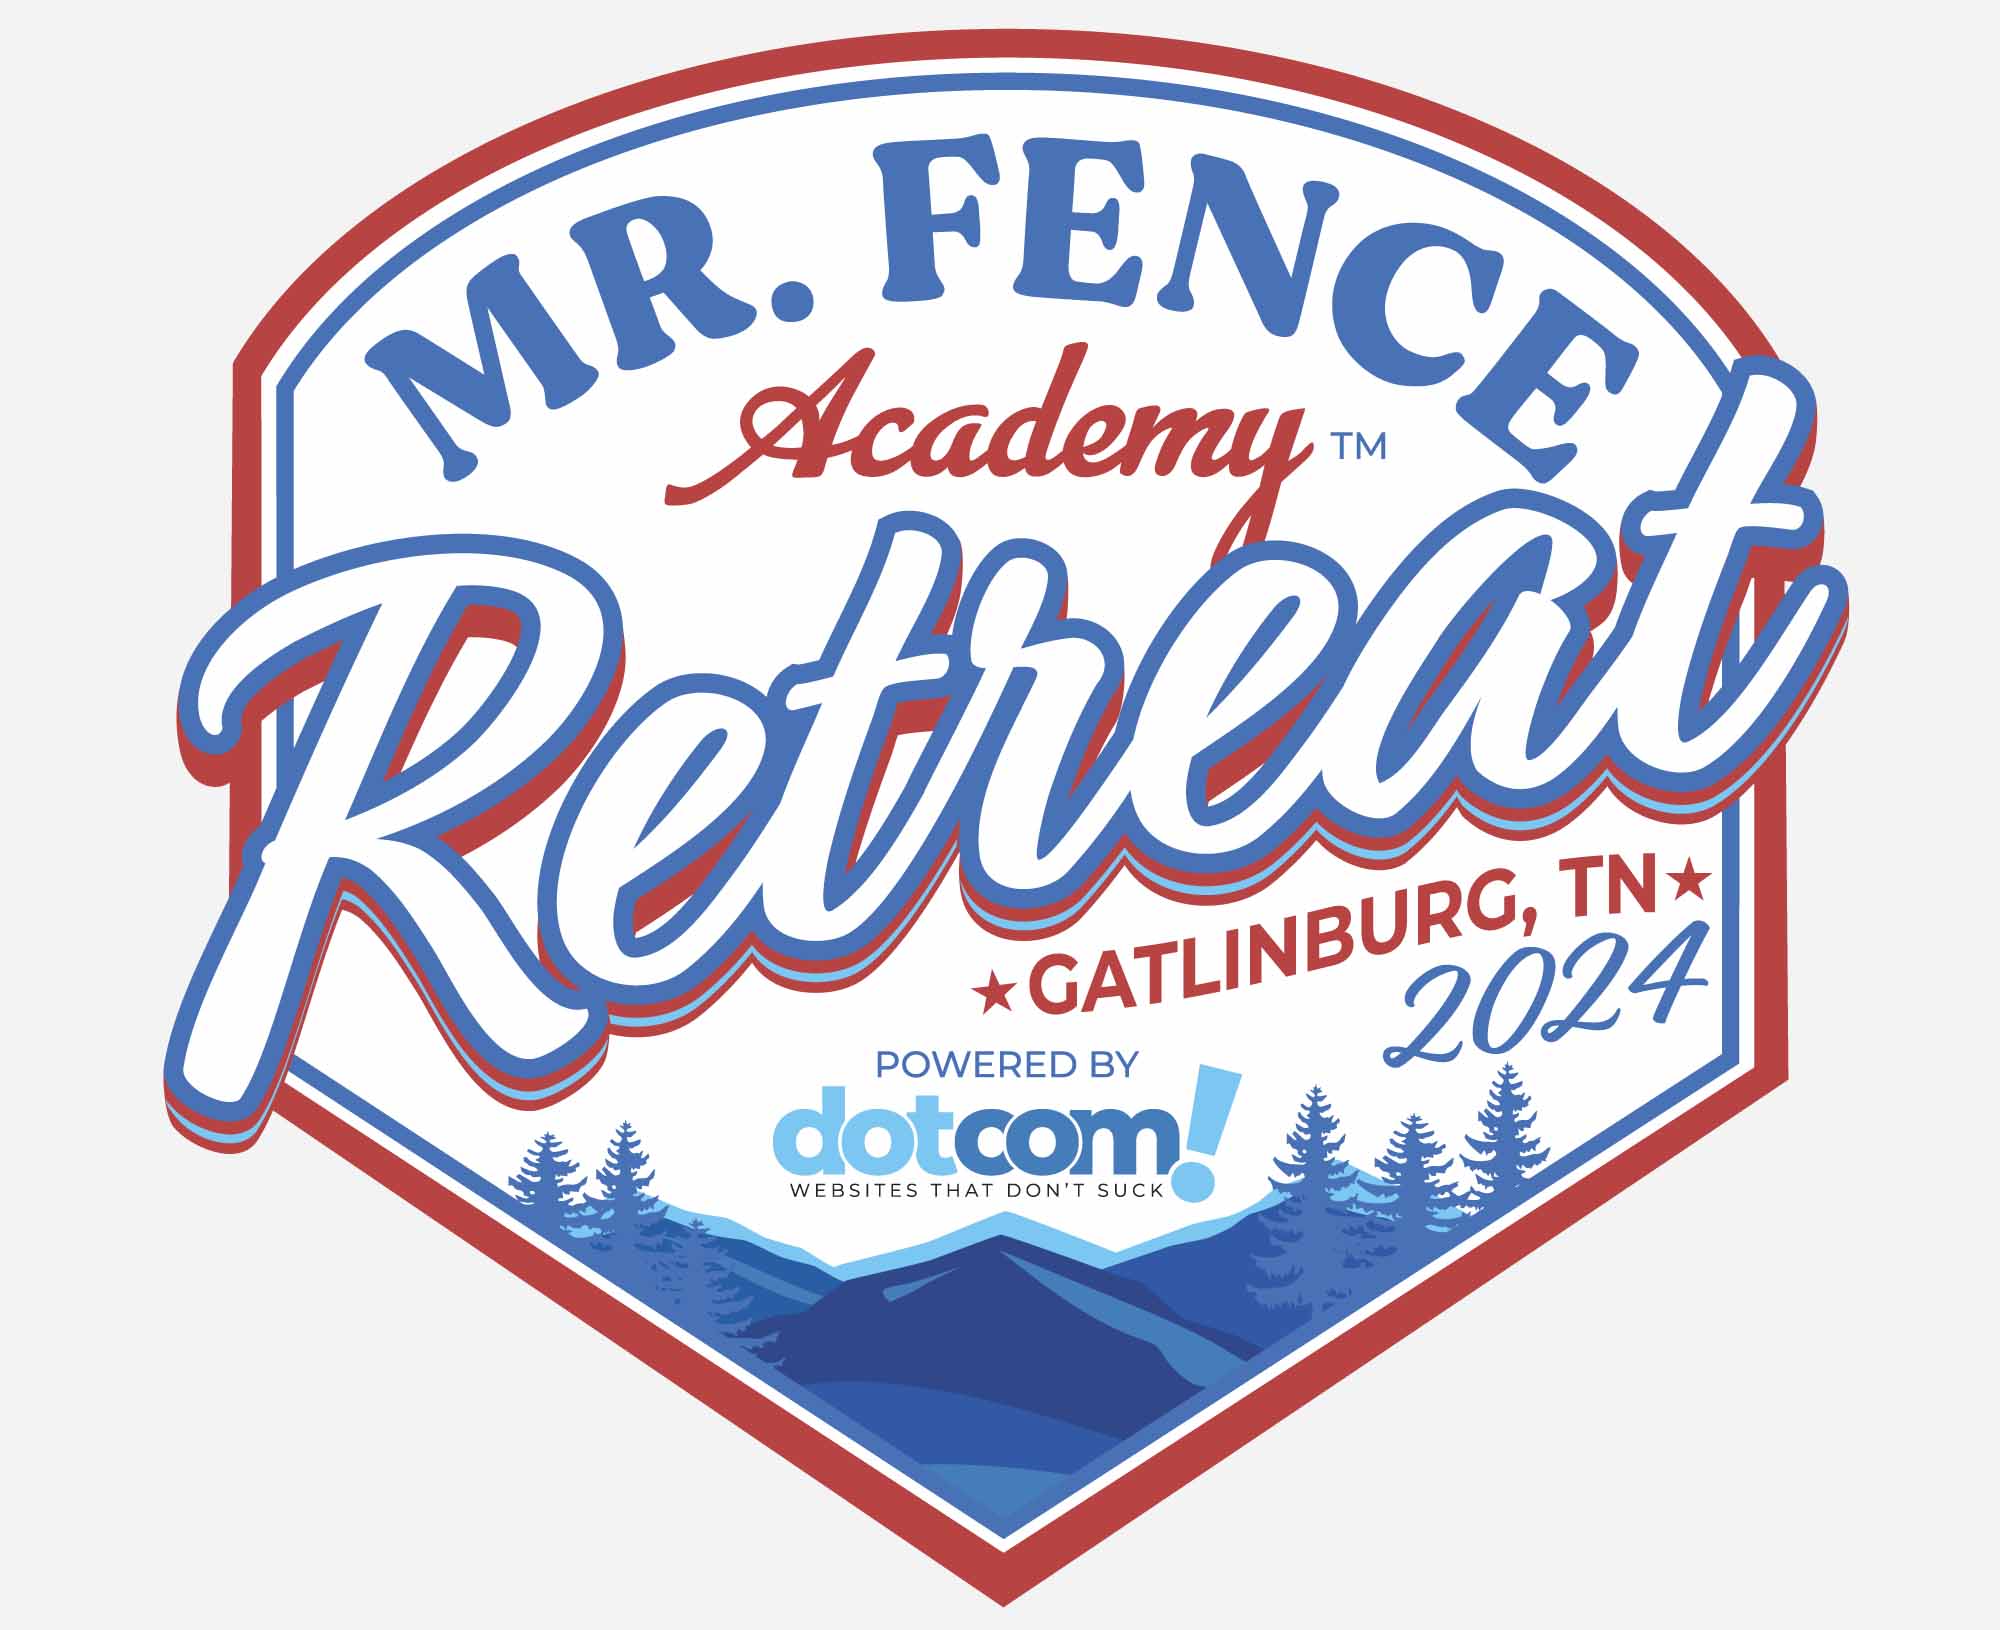 Mr Fence Academy Retreat - Fencing Event